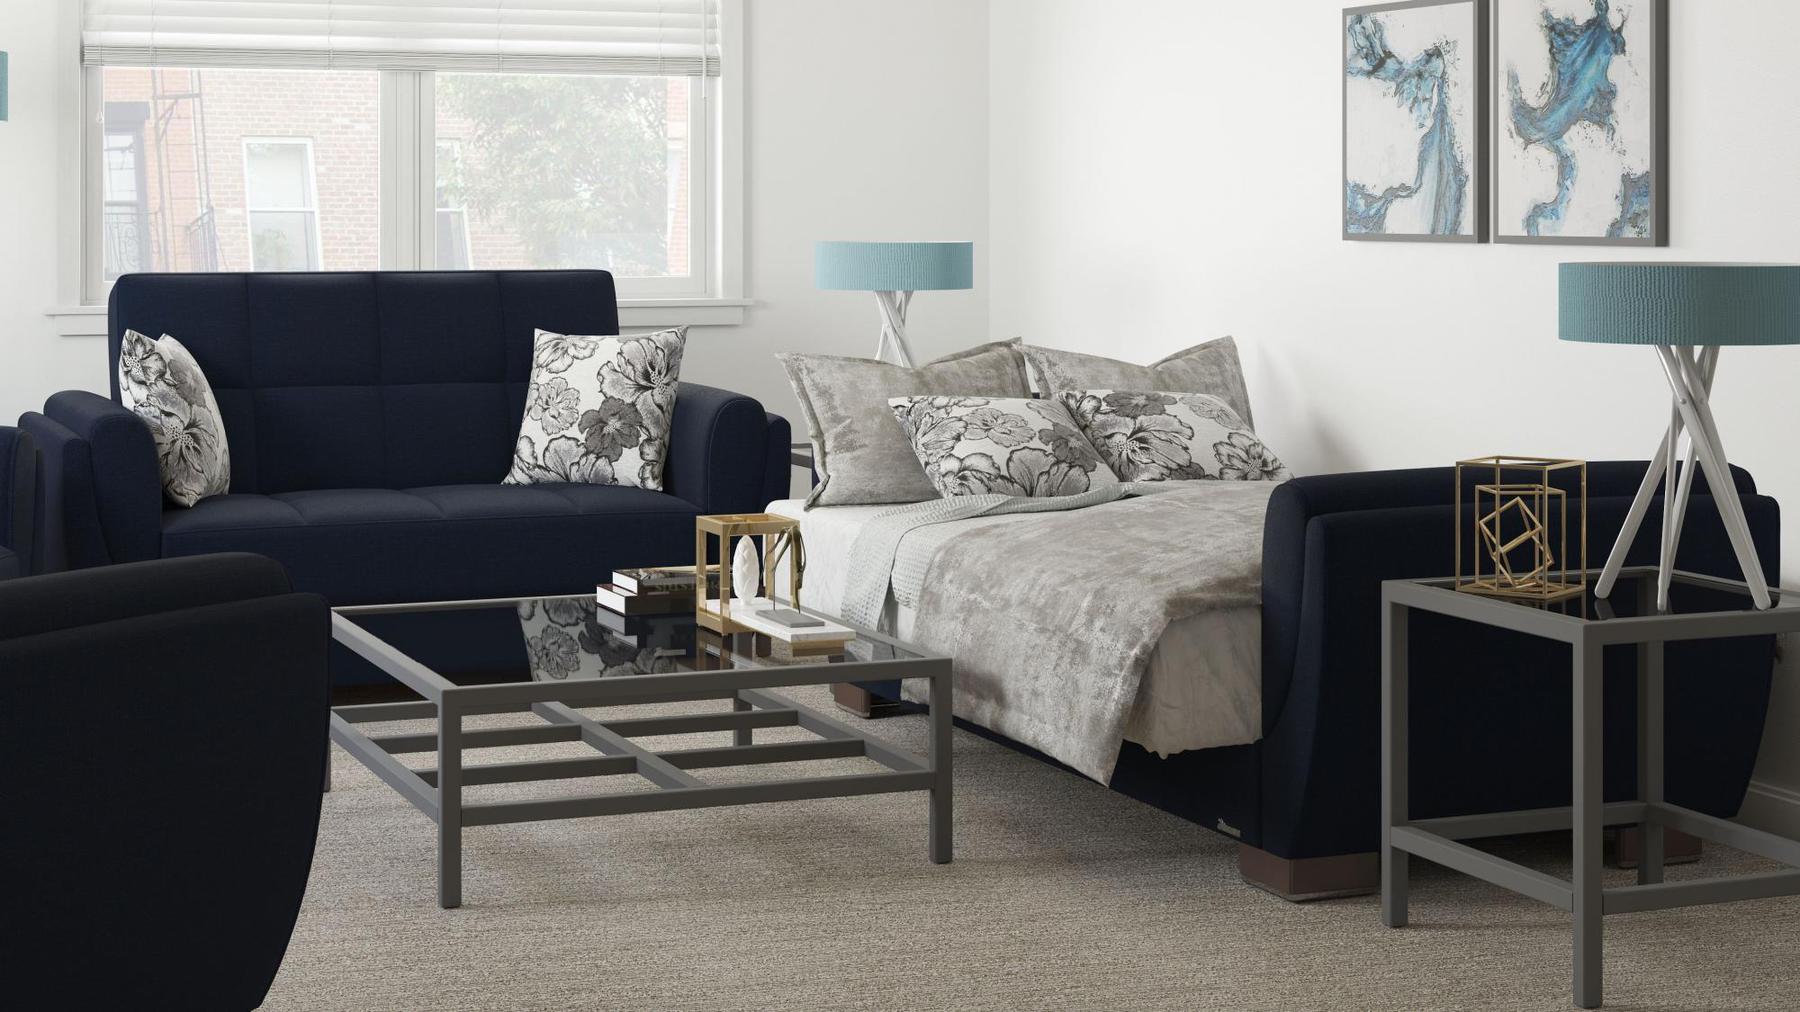 Modern design, Black Blue Denim , Chenille  upholstered convertible sleeper Loveseat with underseat storage from Voyage Shelter by Ottomanson in living room lifestyle setting converted to sleeper. This Loveseat measures 71 inches width by 36 inches depth by 41 inches height.